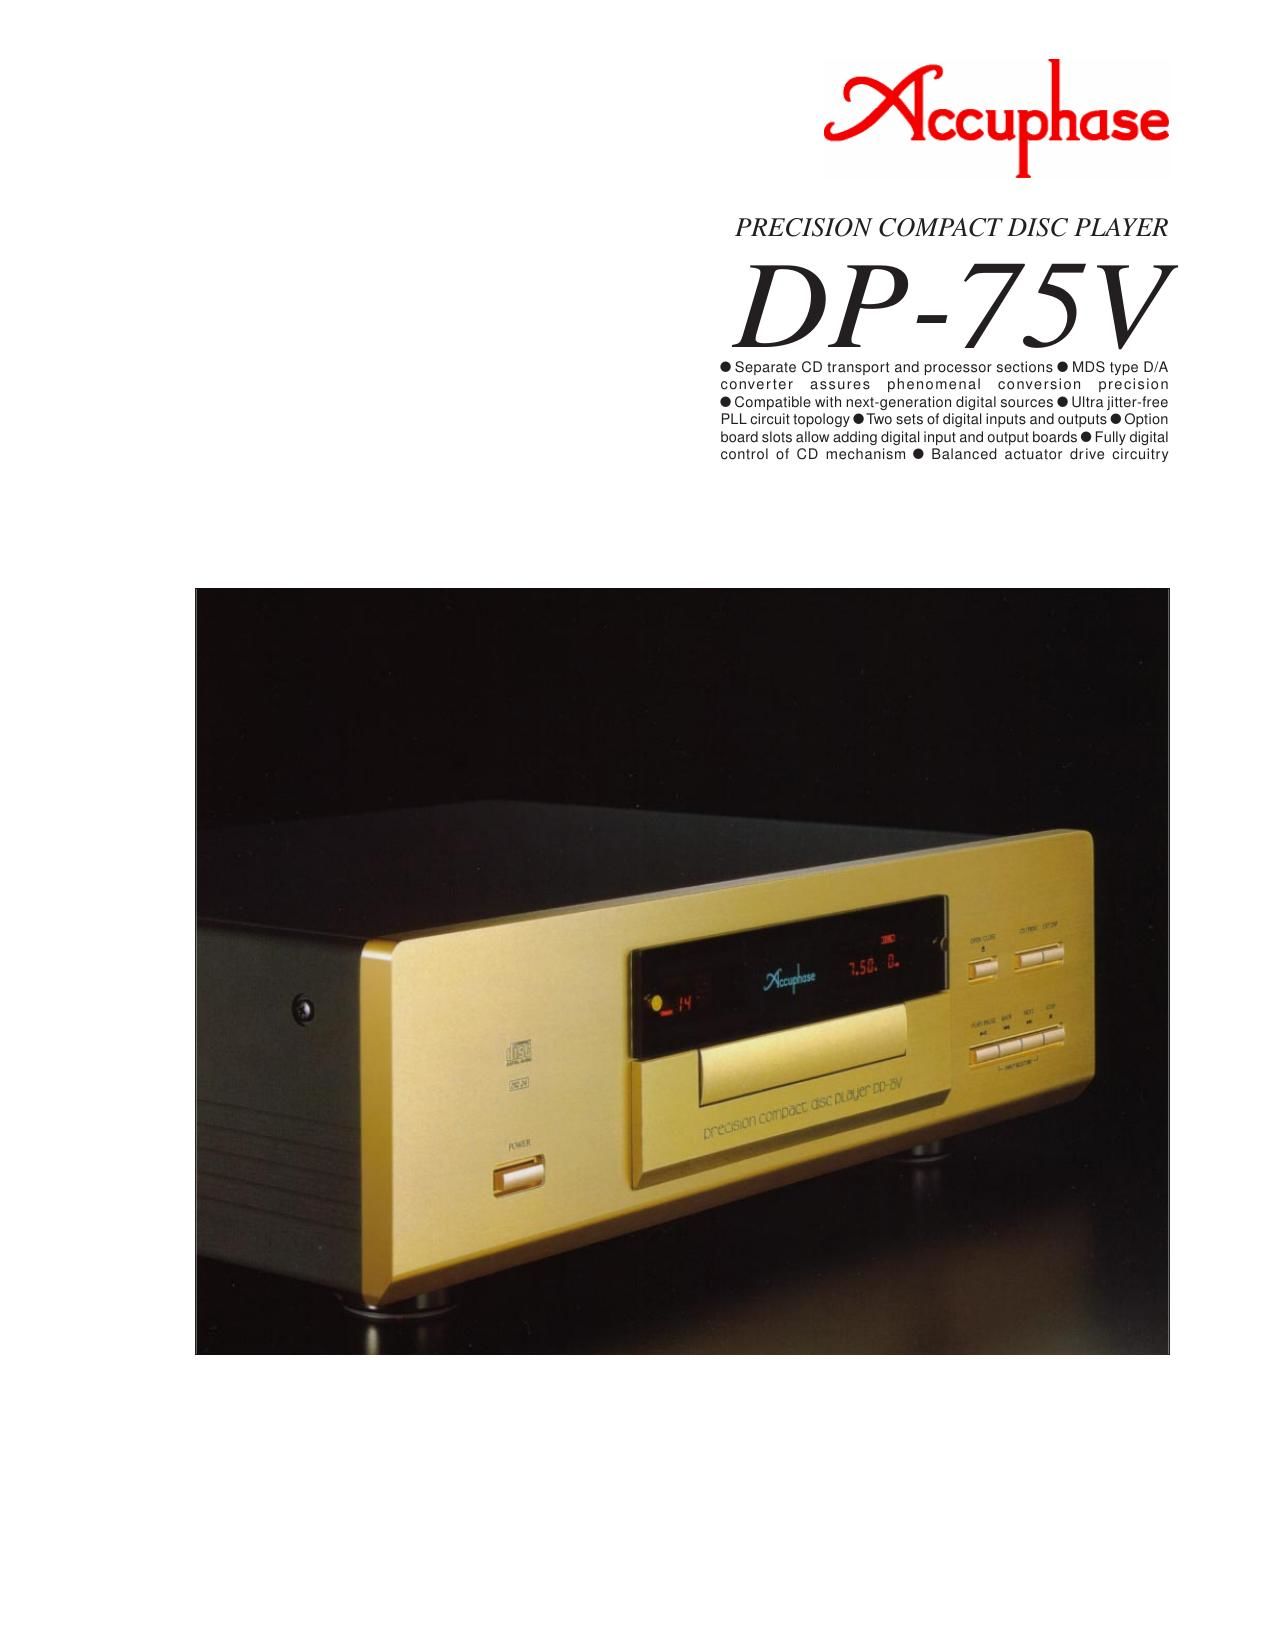 Accuphase DP 75 V Brochure